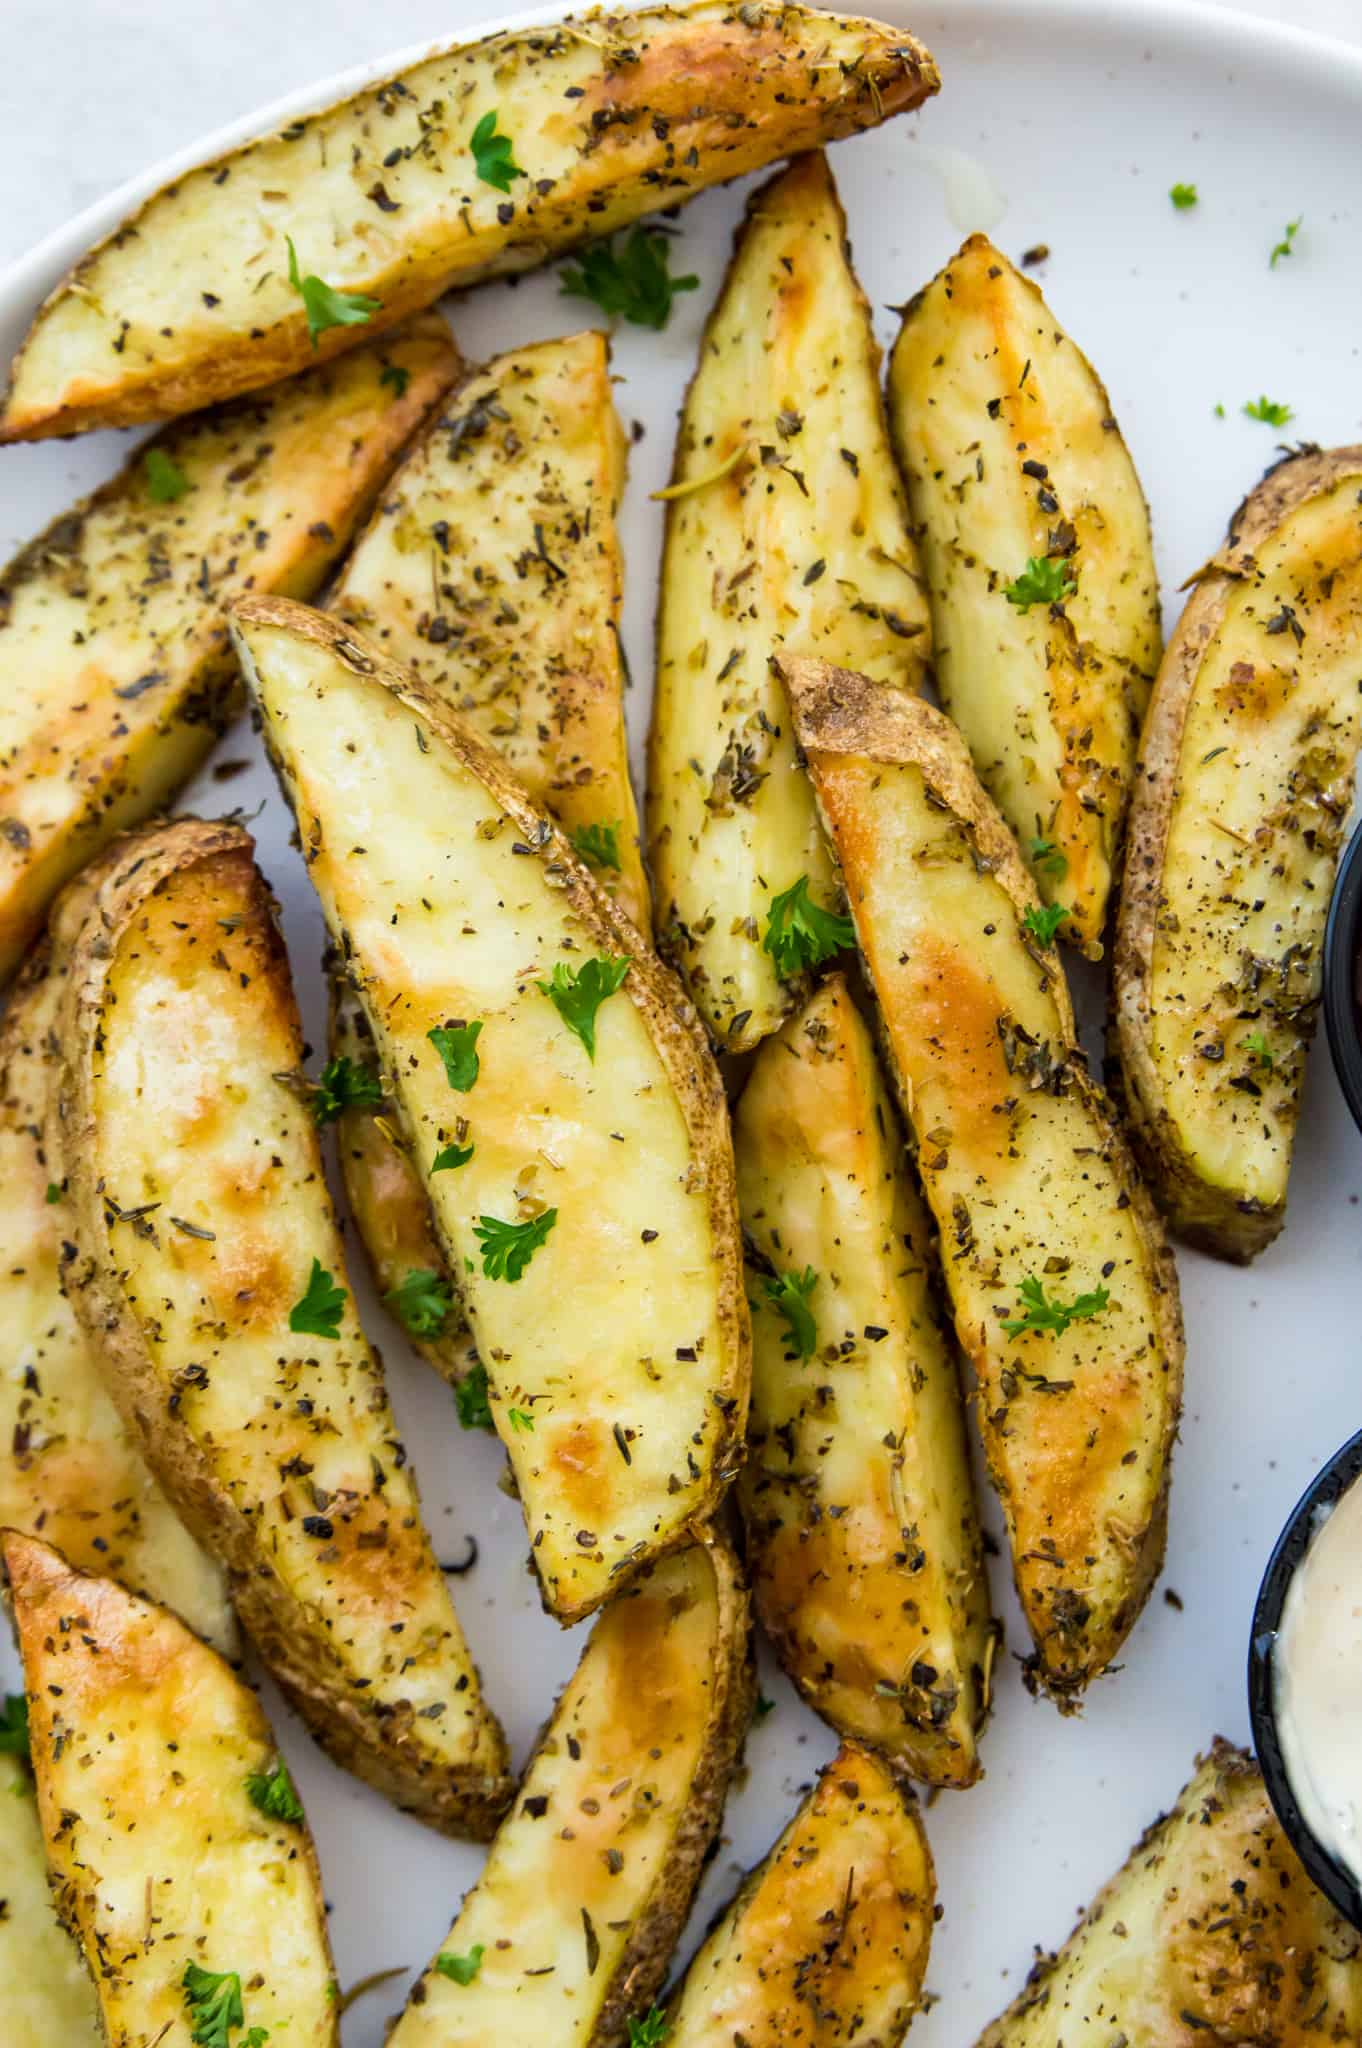 A plate of homemade potato wedges seasoned with fresh parsley .